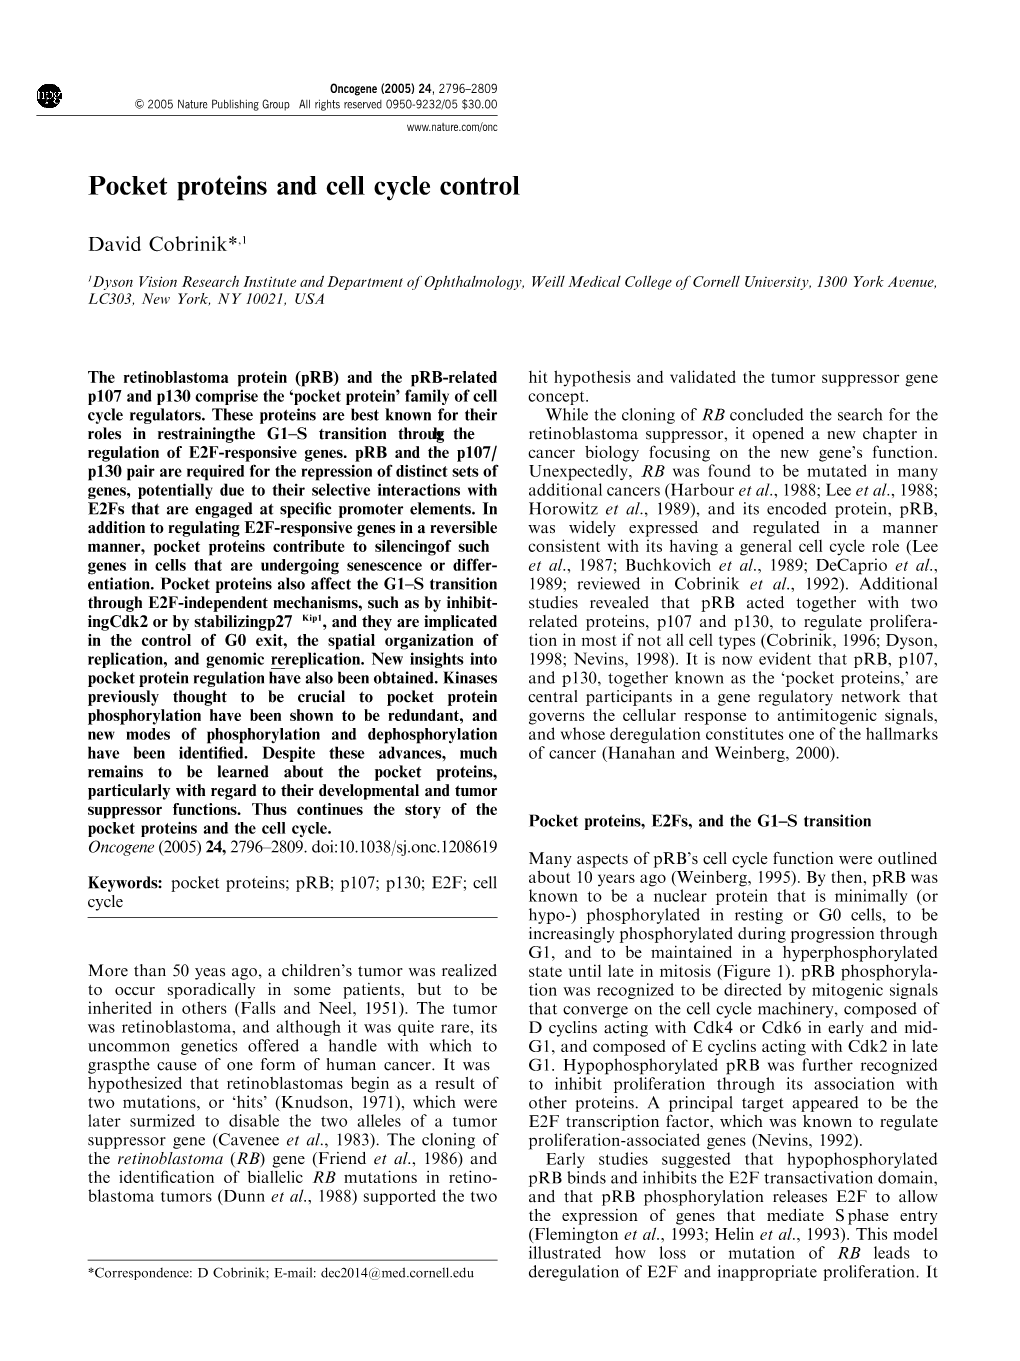 Pocket Proteins and Cell Cycle Control